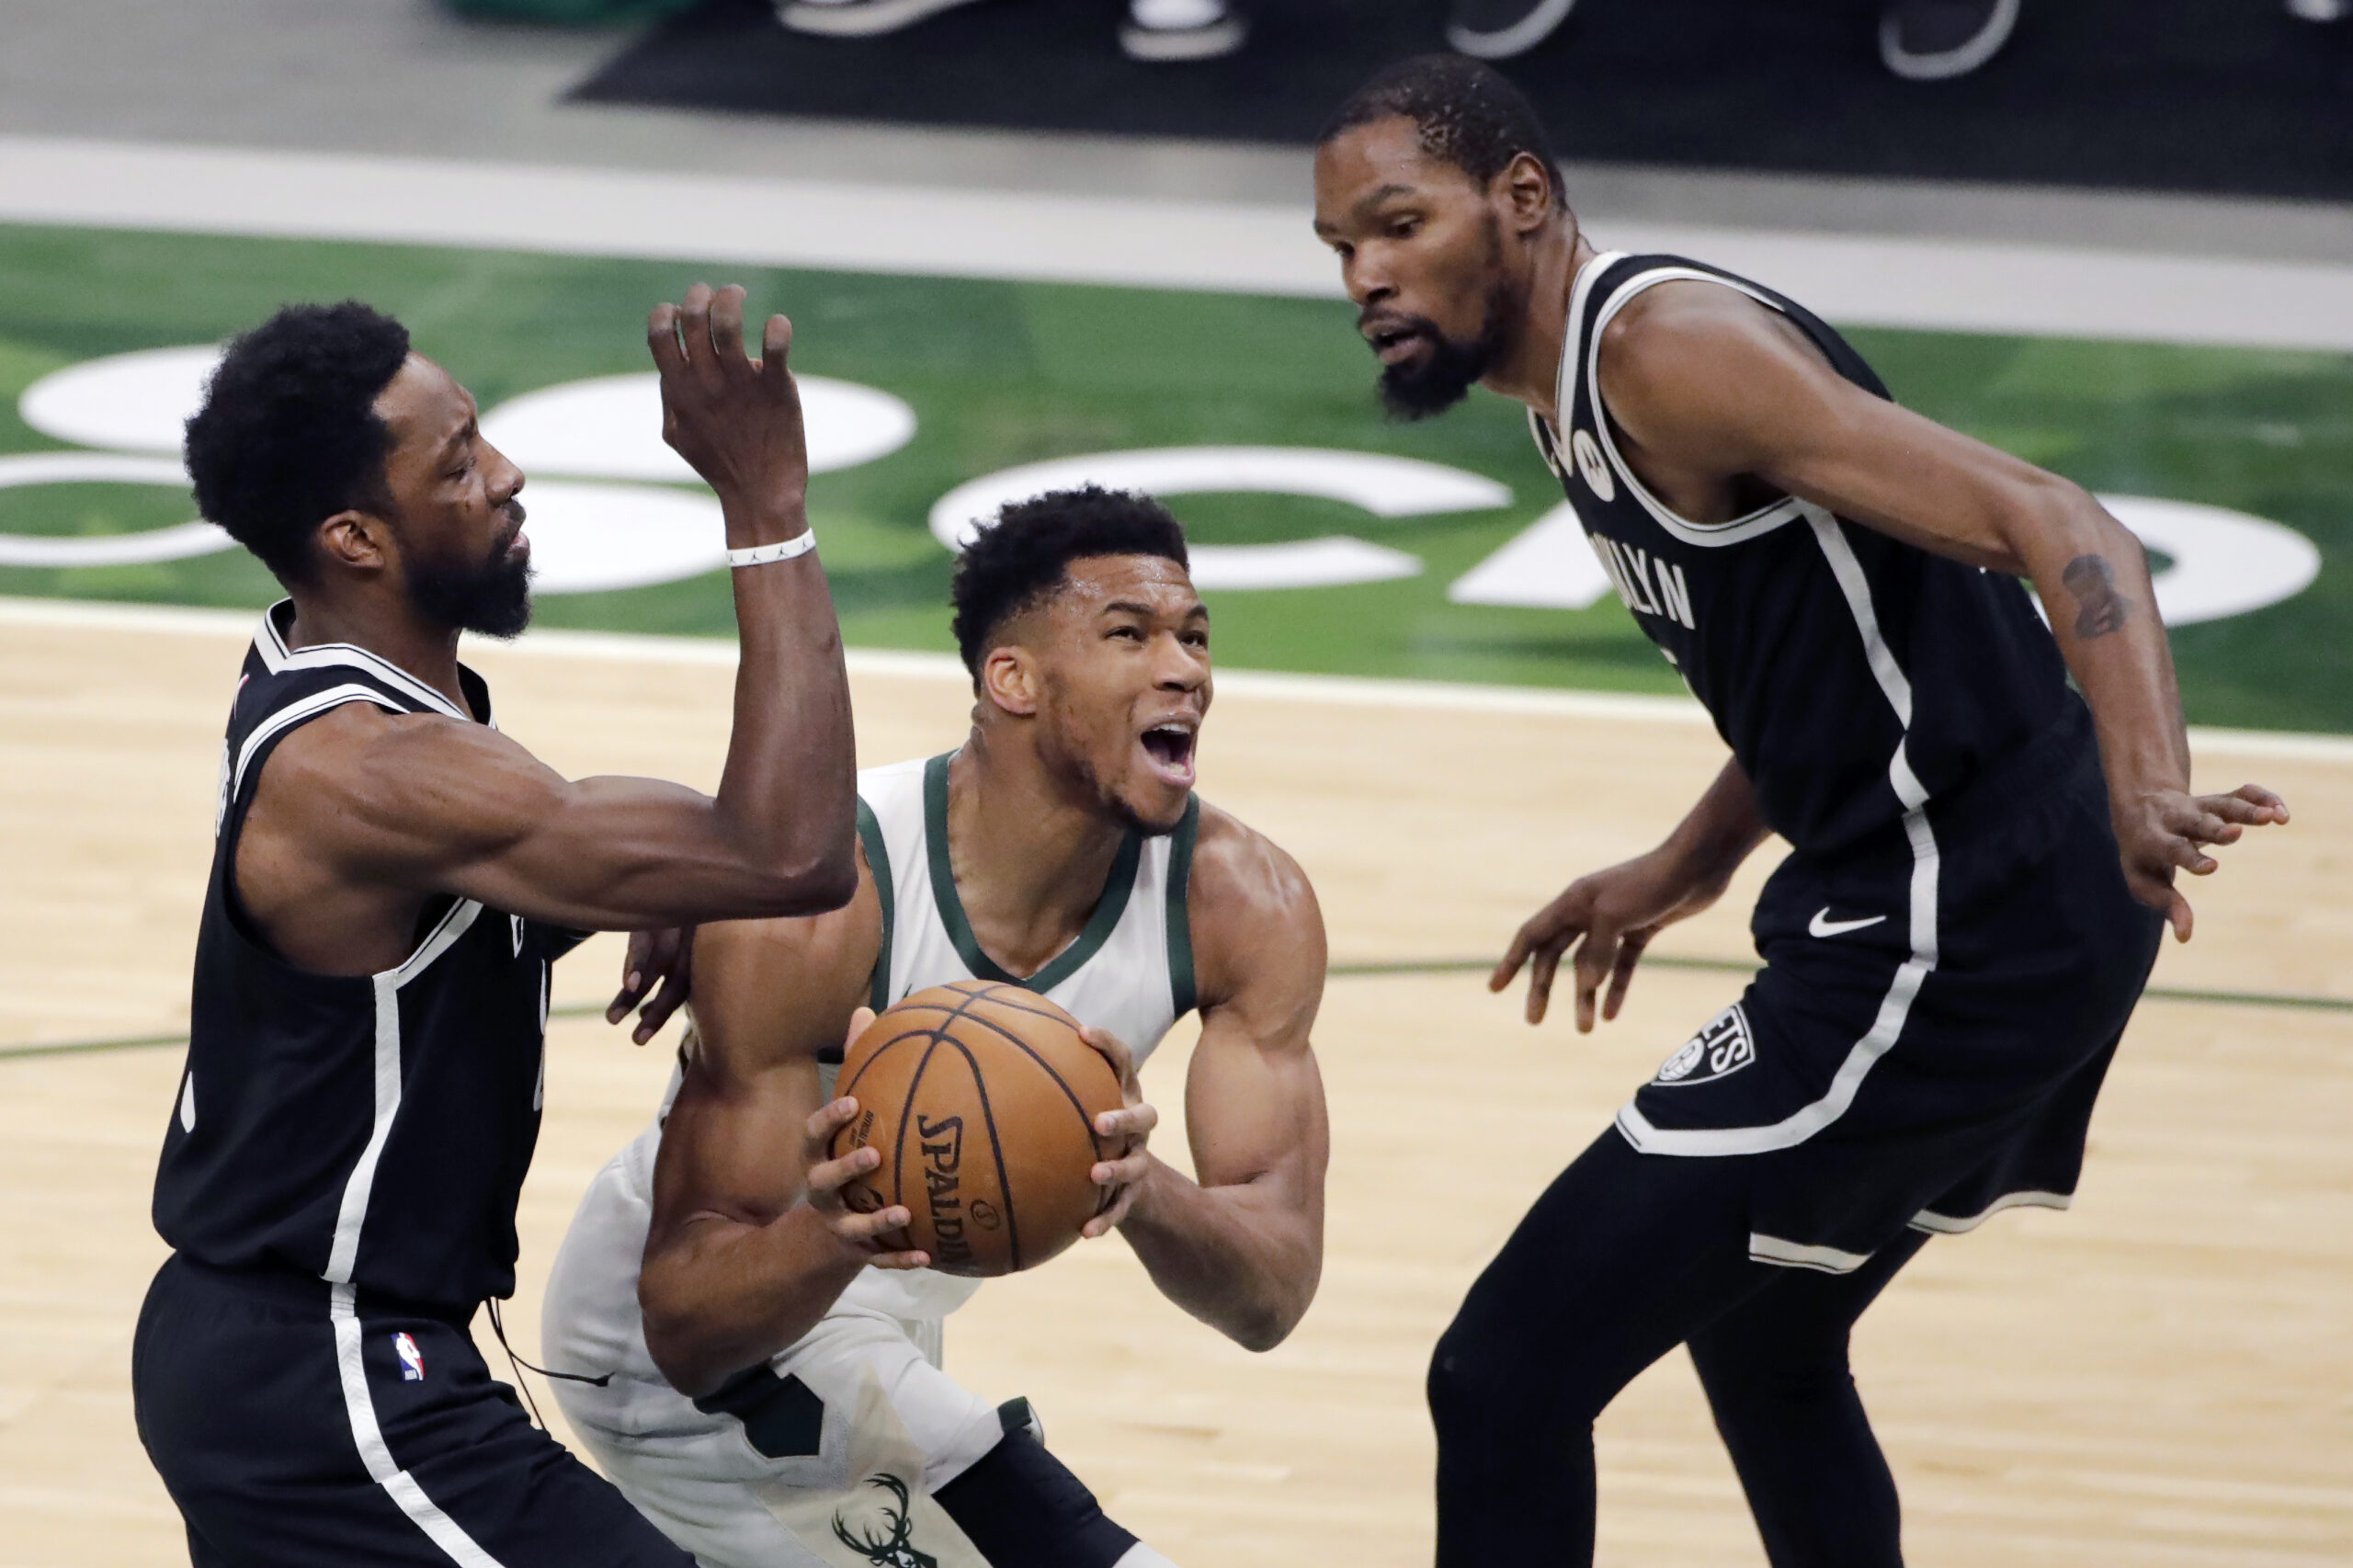 Giannis Antetokounmpo maneuvers between two Nets players